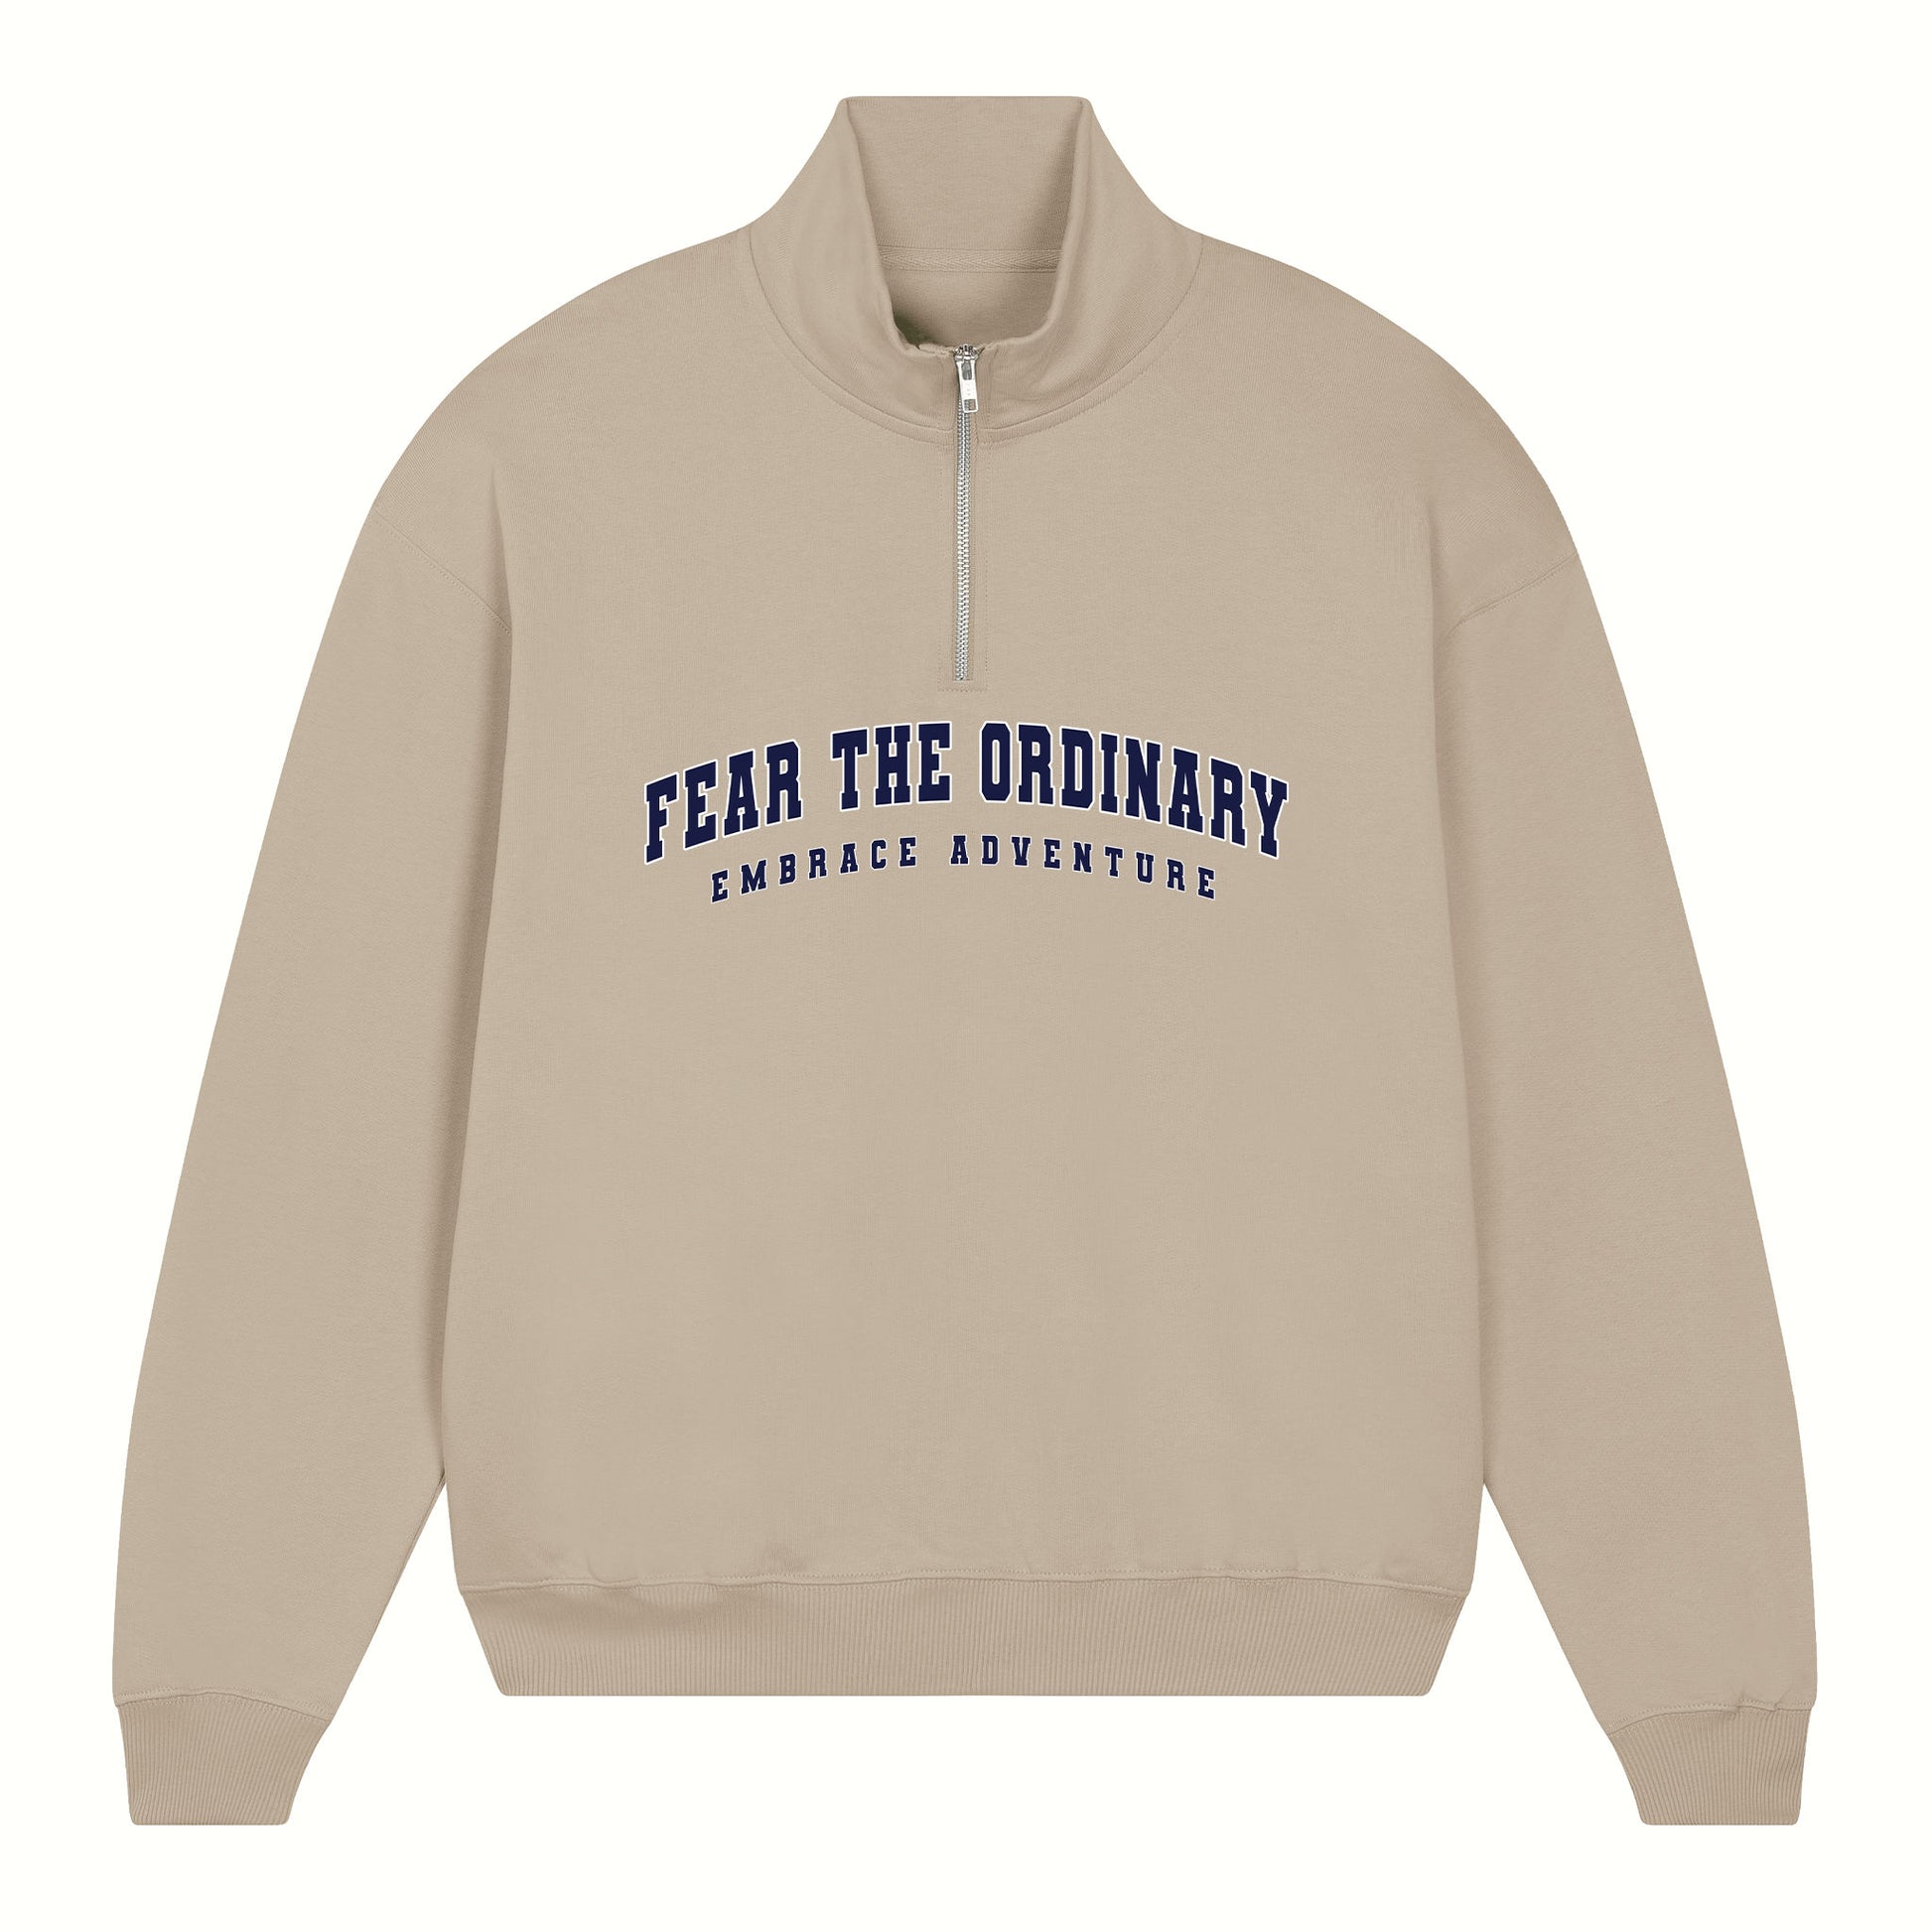 Fear the ordinary sand oversized vintage half zip sweater with blue navy embrace adventure print.